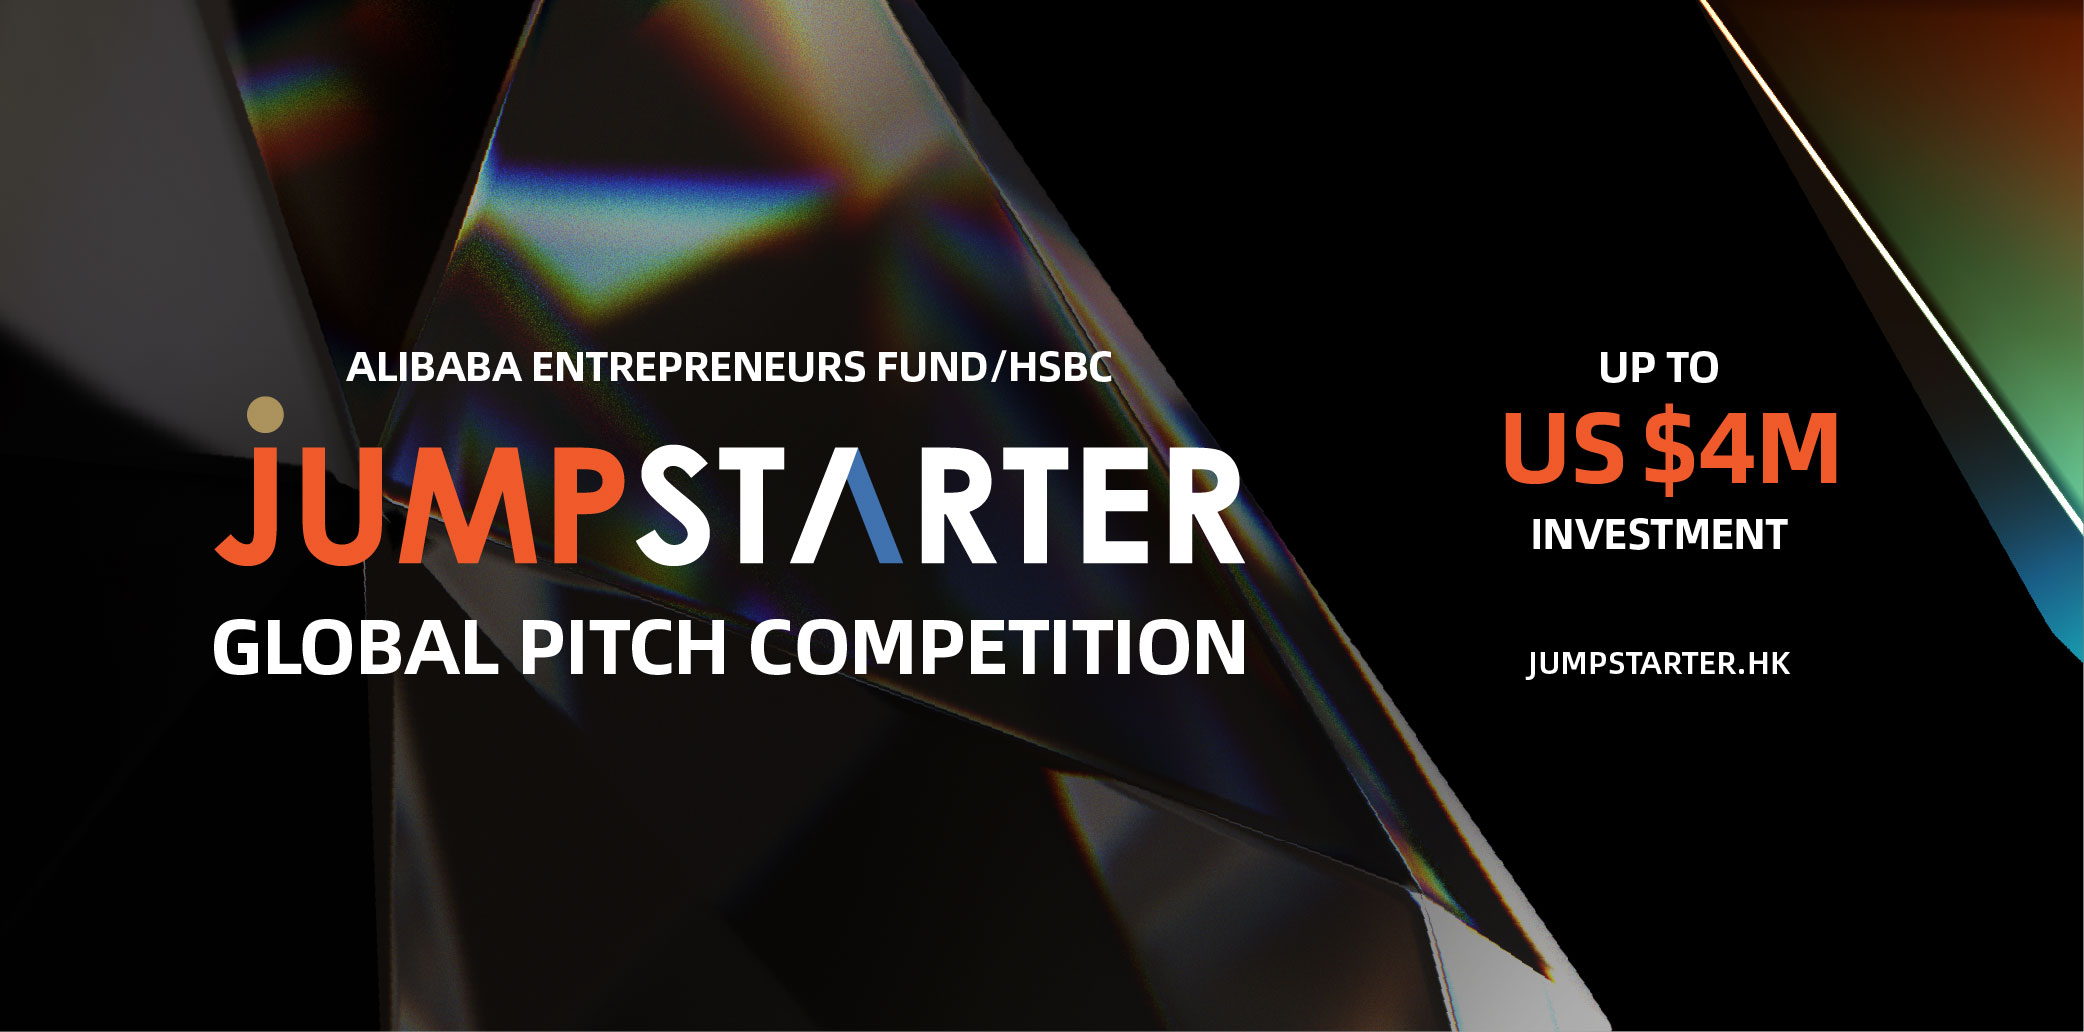 Alibaba Entrepreneurs Fund / HSBC JUMPSTARTER 2022 global pitch competition launches